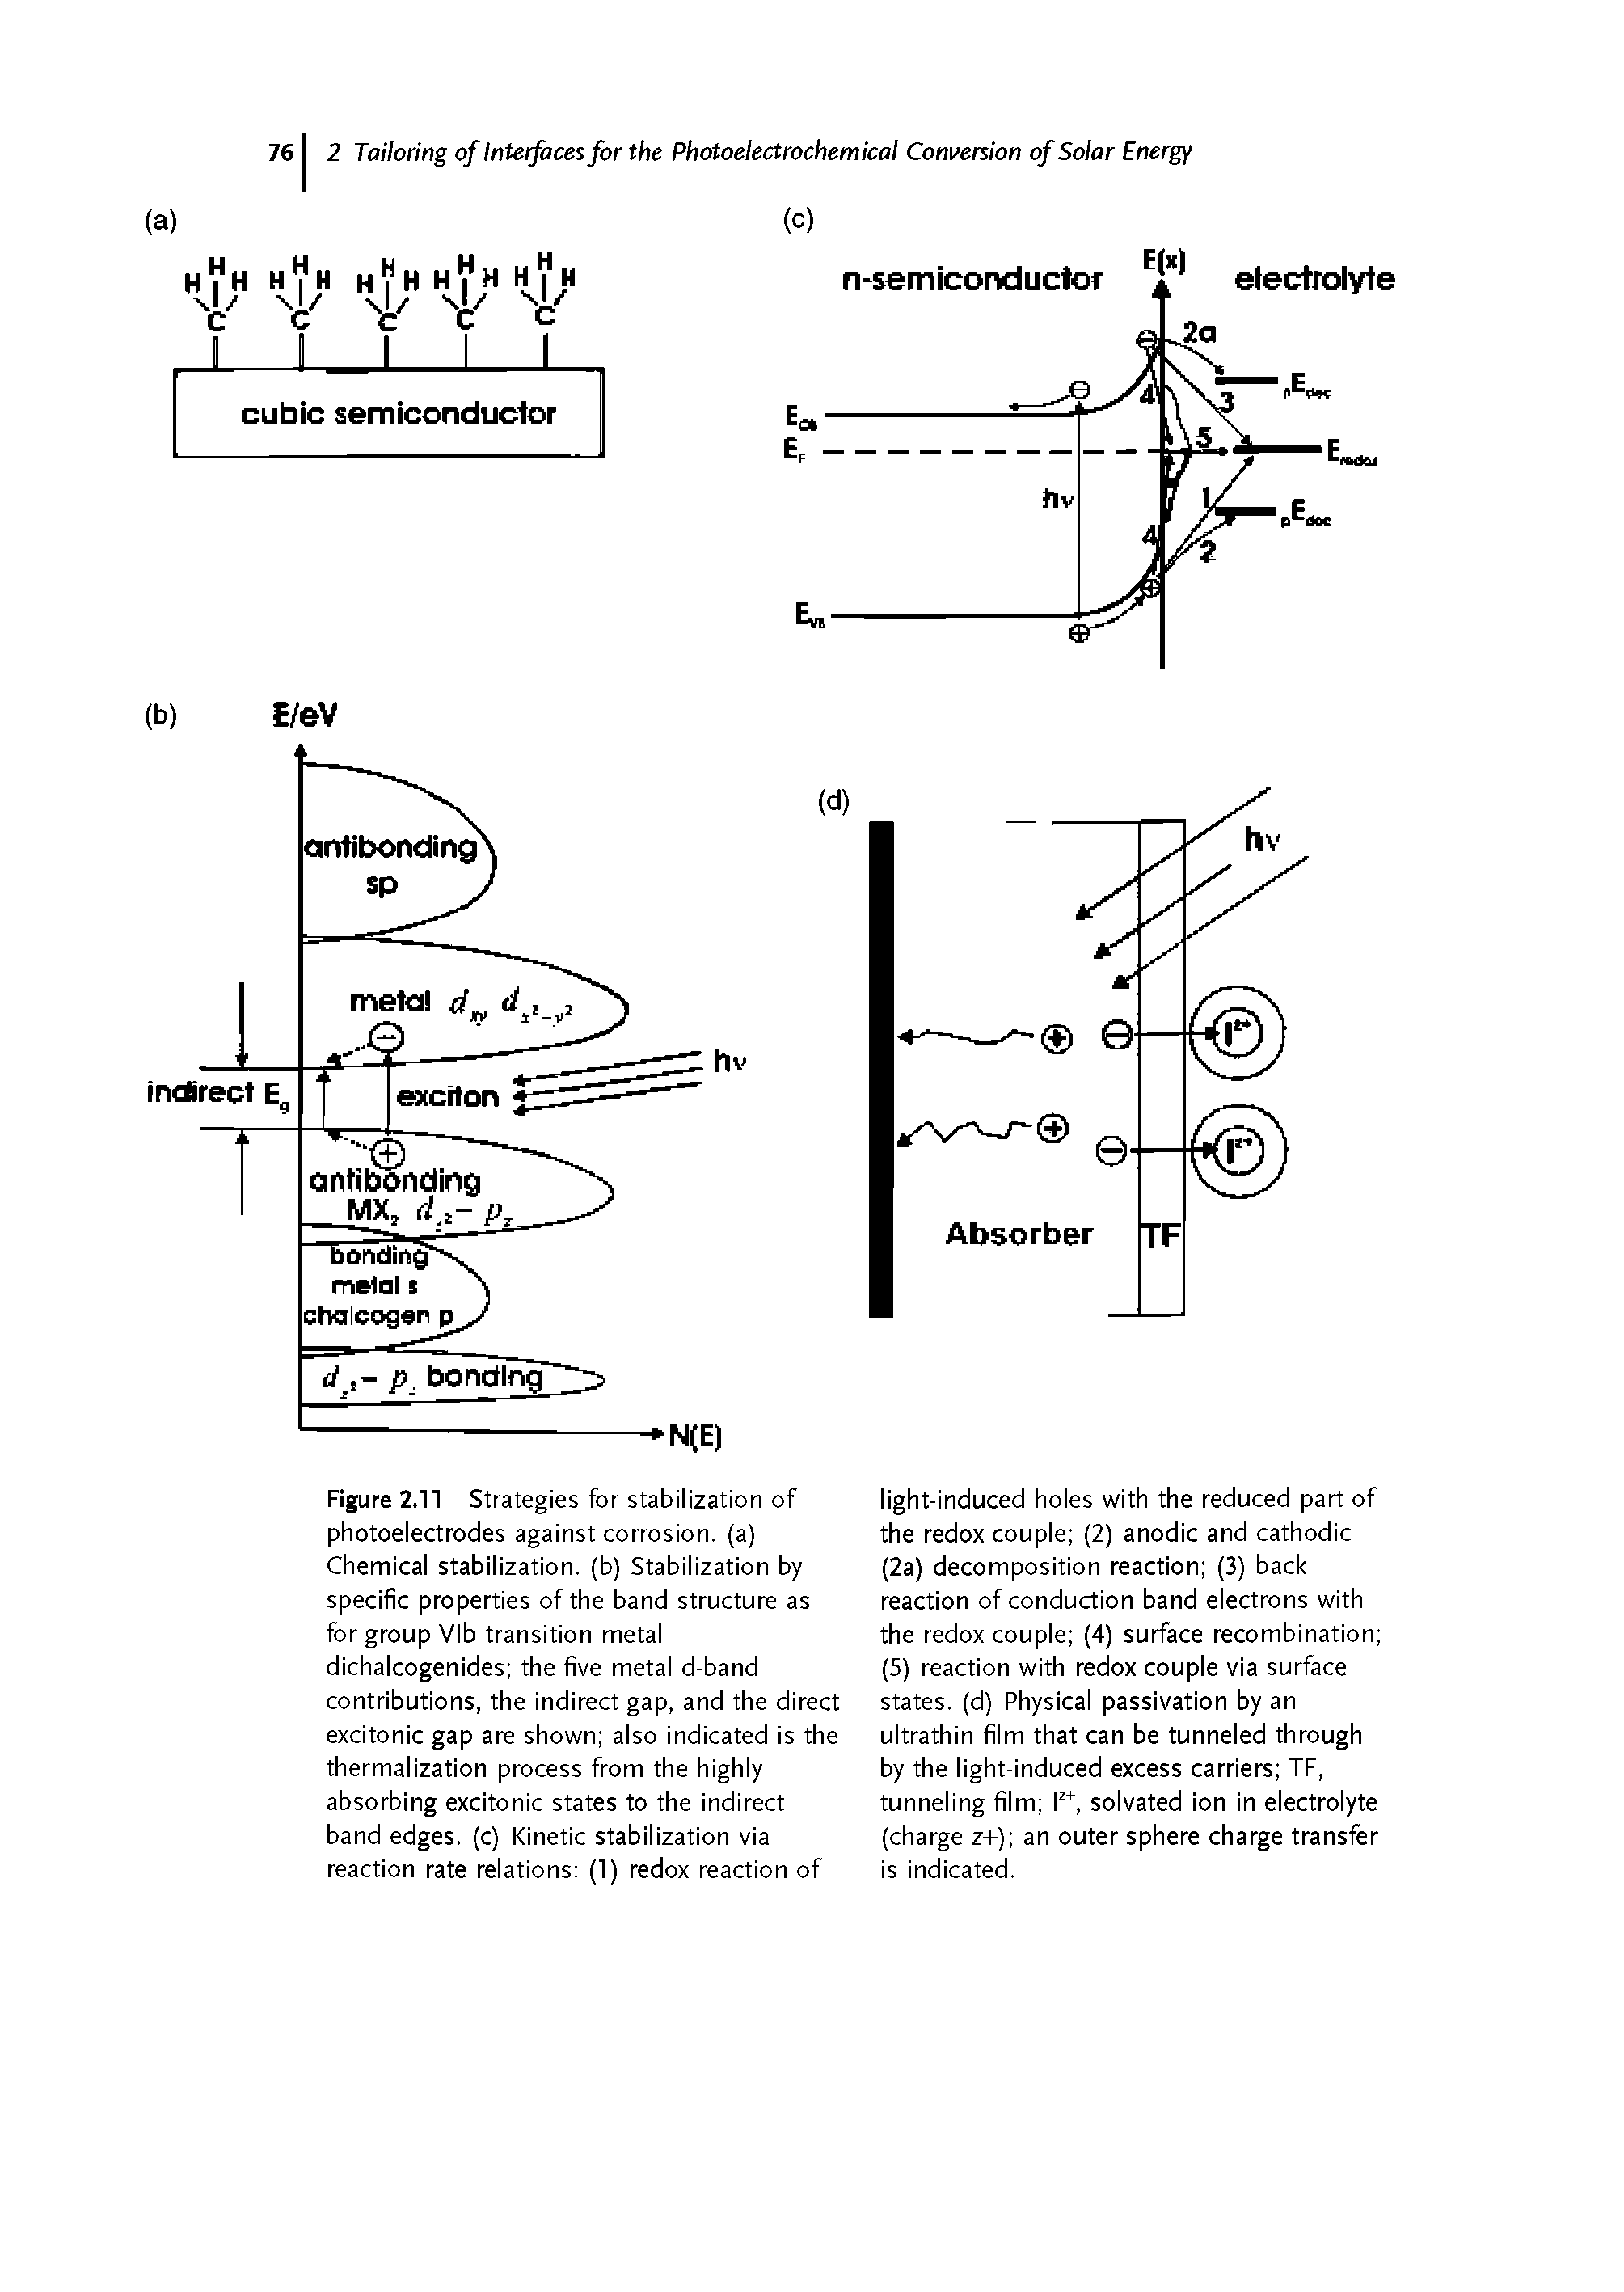 Figure 2.11 Strategies for stabilization of photoelectrodes against corrosion, (a) Chemical stabilization, (b) Stabilization by specific properties of the band structure as for group VIb transition metal dichalcogenides the five metal d-band contributions, the indirect gap, and the direct excitonic gap are shown also indicated is the thermalization process from the highly absorbing excitonic states to the indirect band edges, (c) Kinetic stabilization via reaction rate relations (1) redox reaction of...